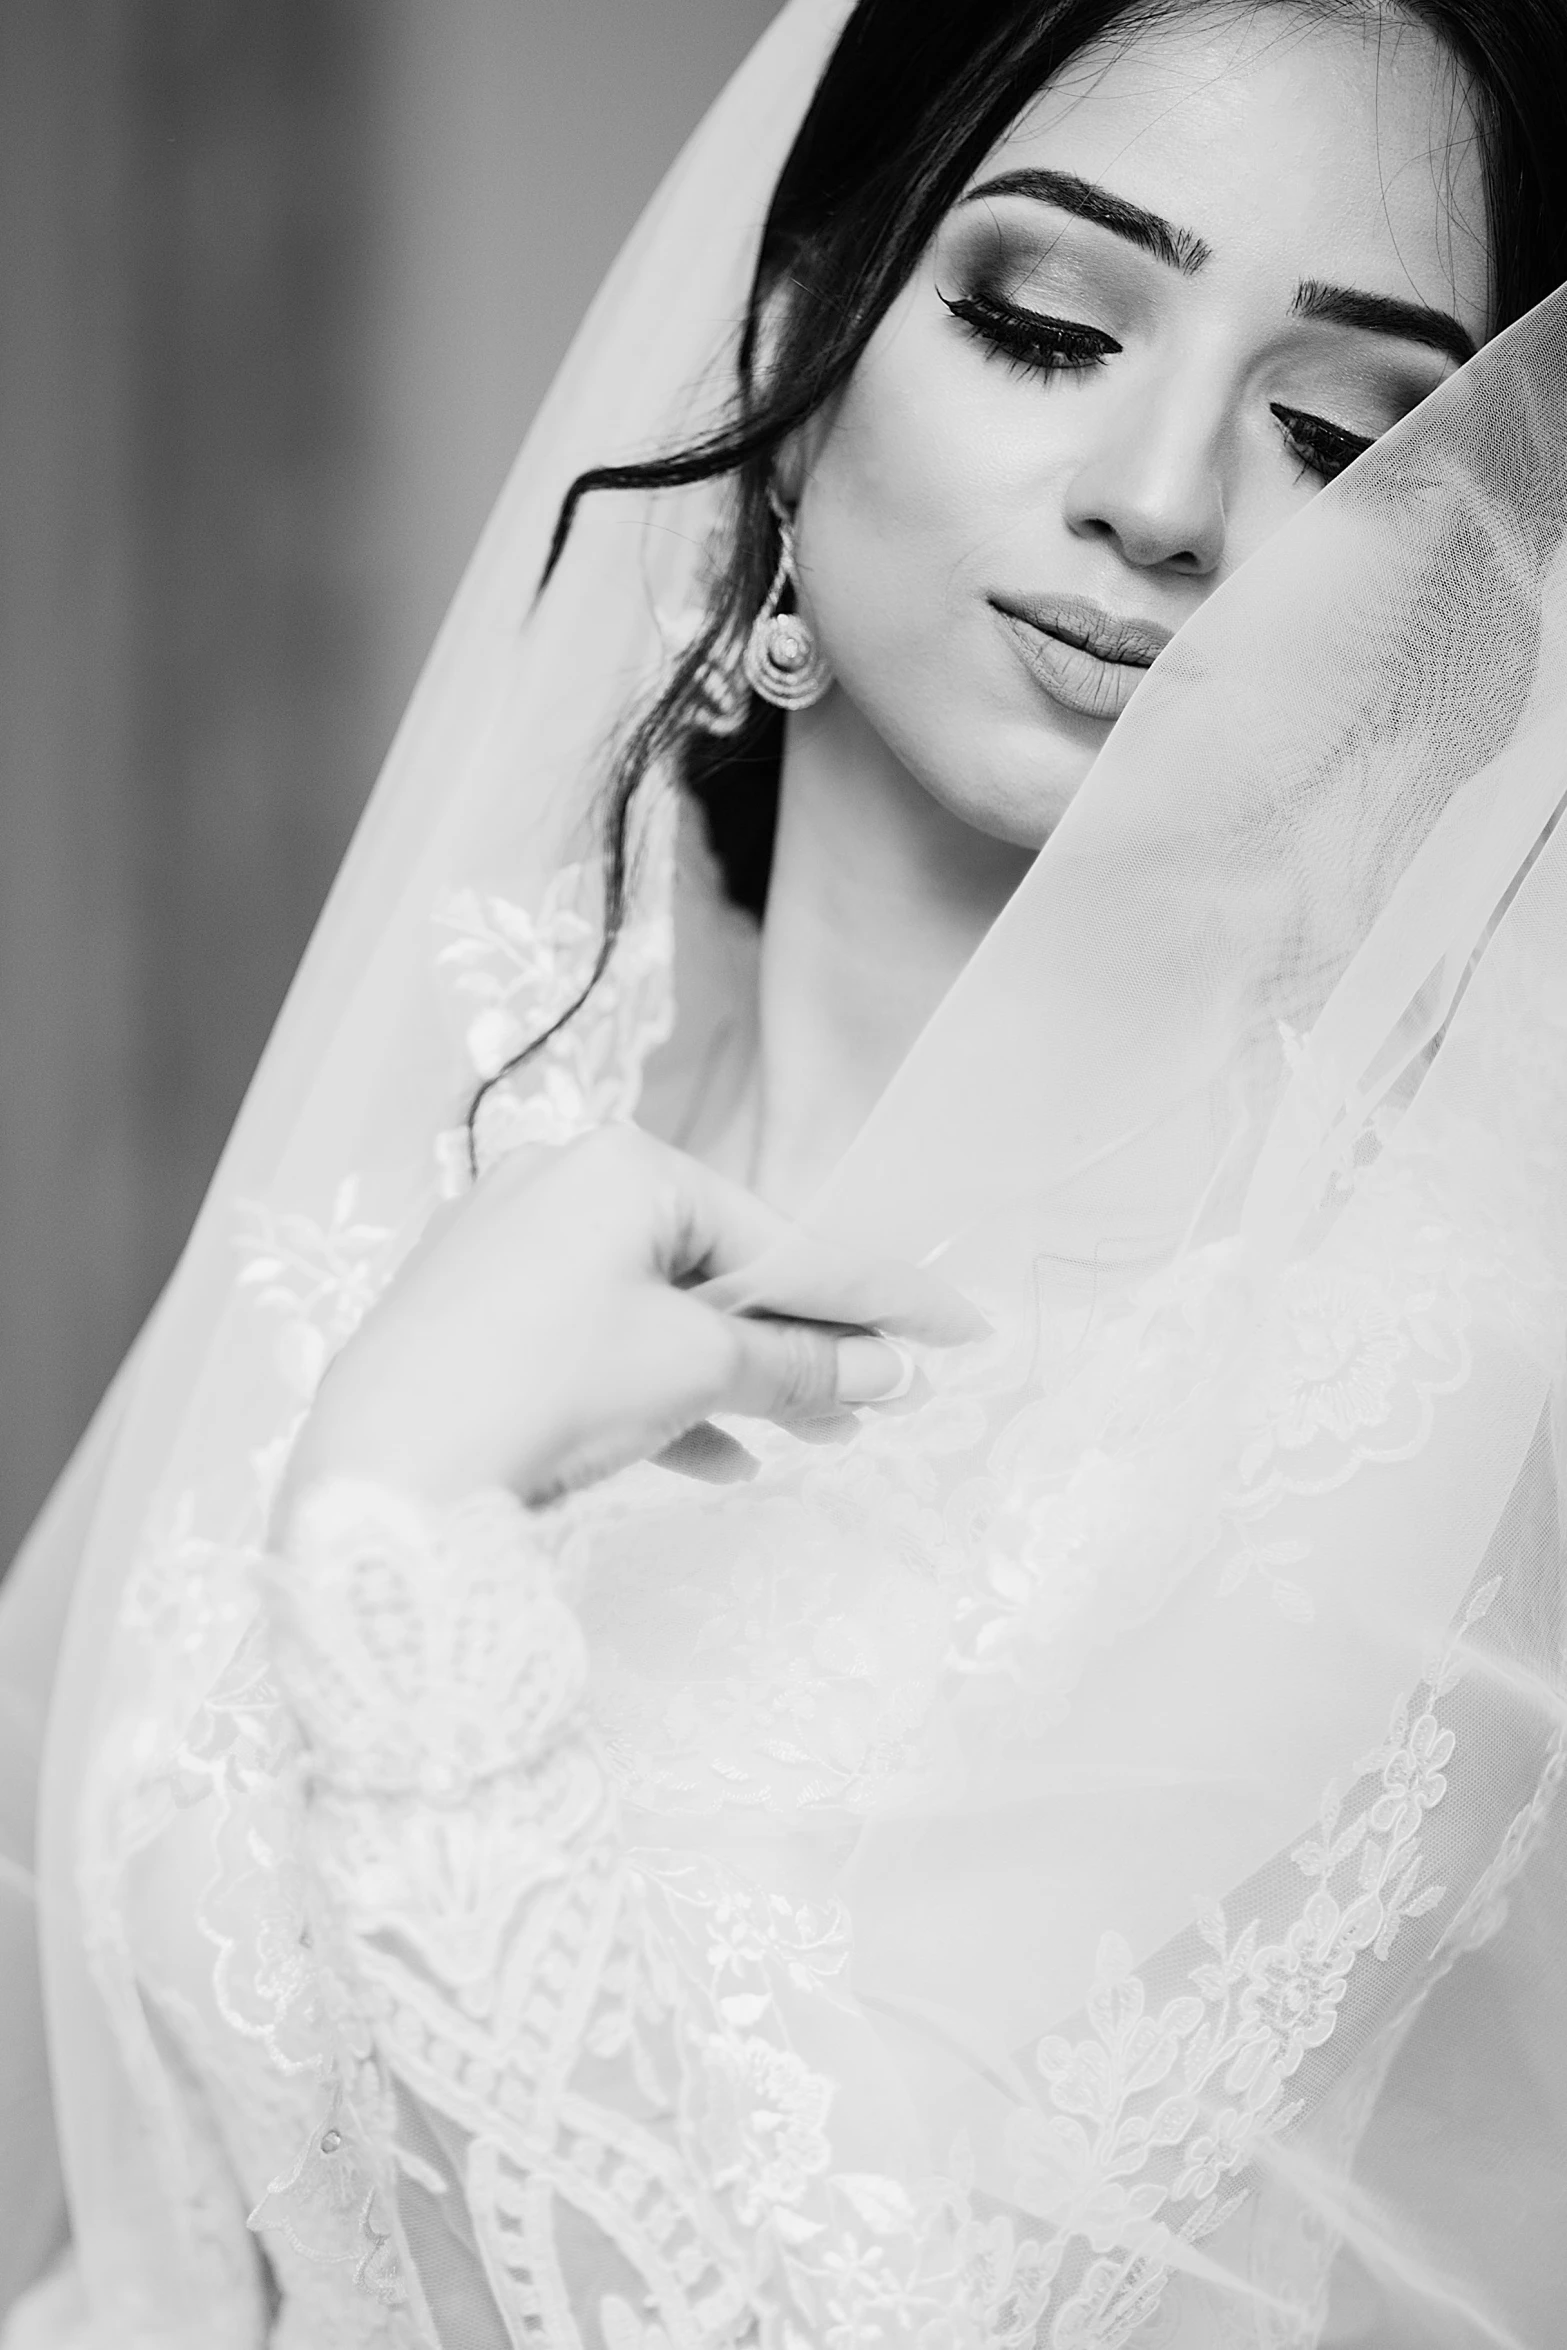 black and white image of a bride holding the veil